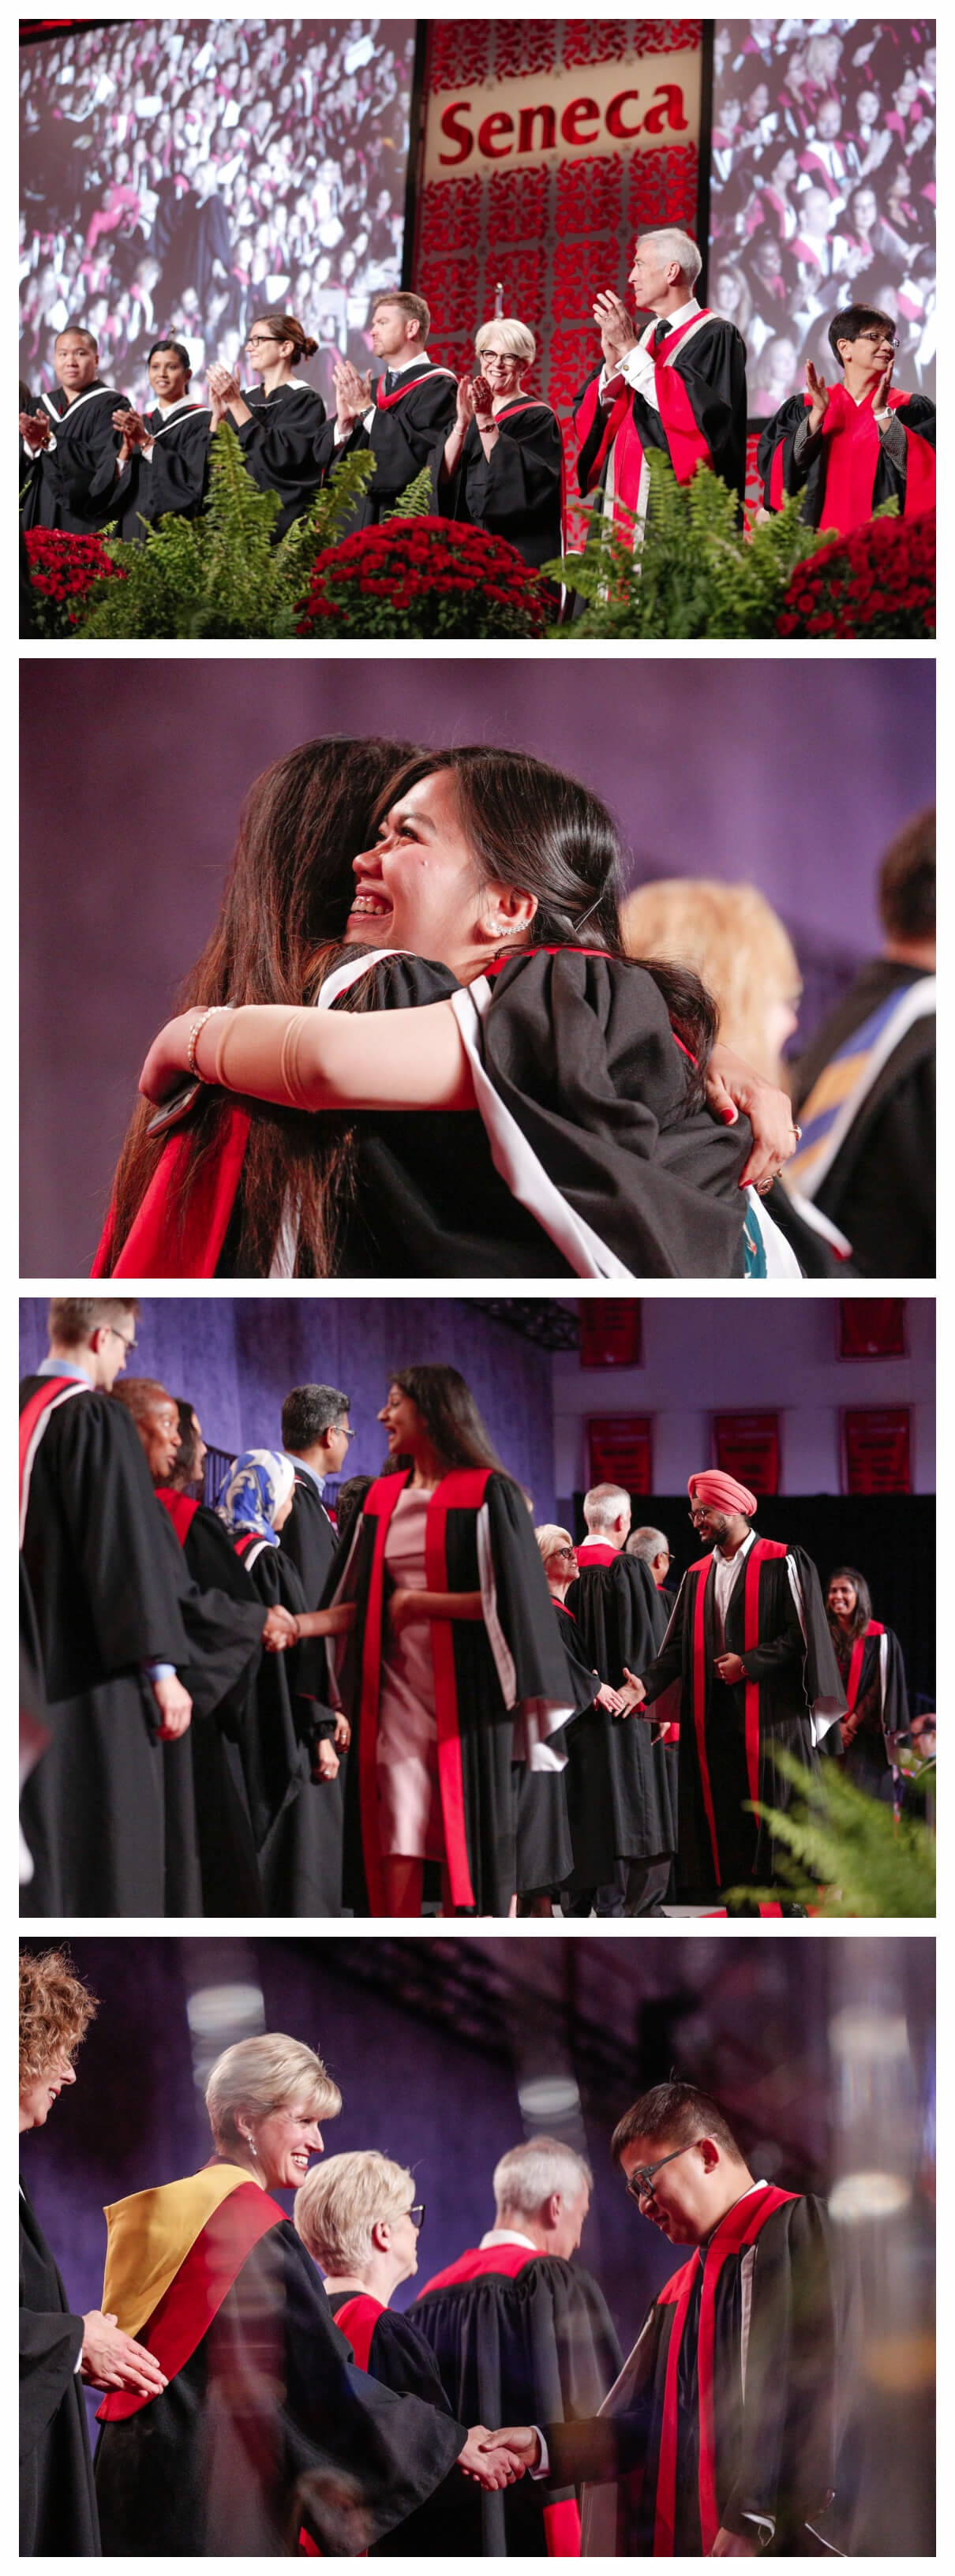 A collage of images from Seneca's Fall 2018 convocation ceremonies